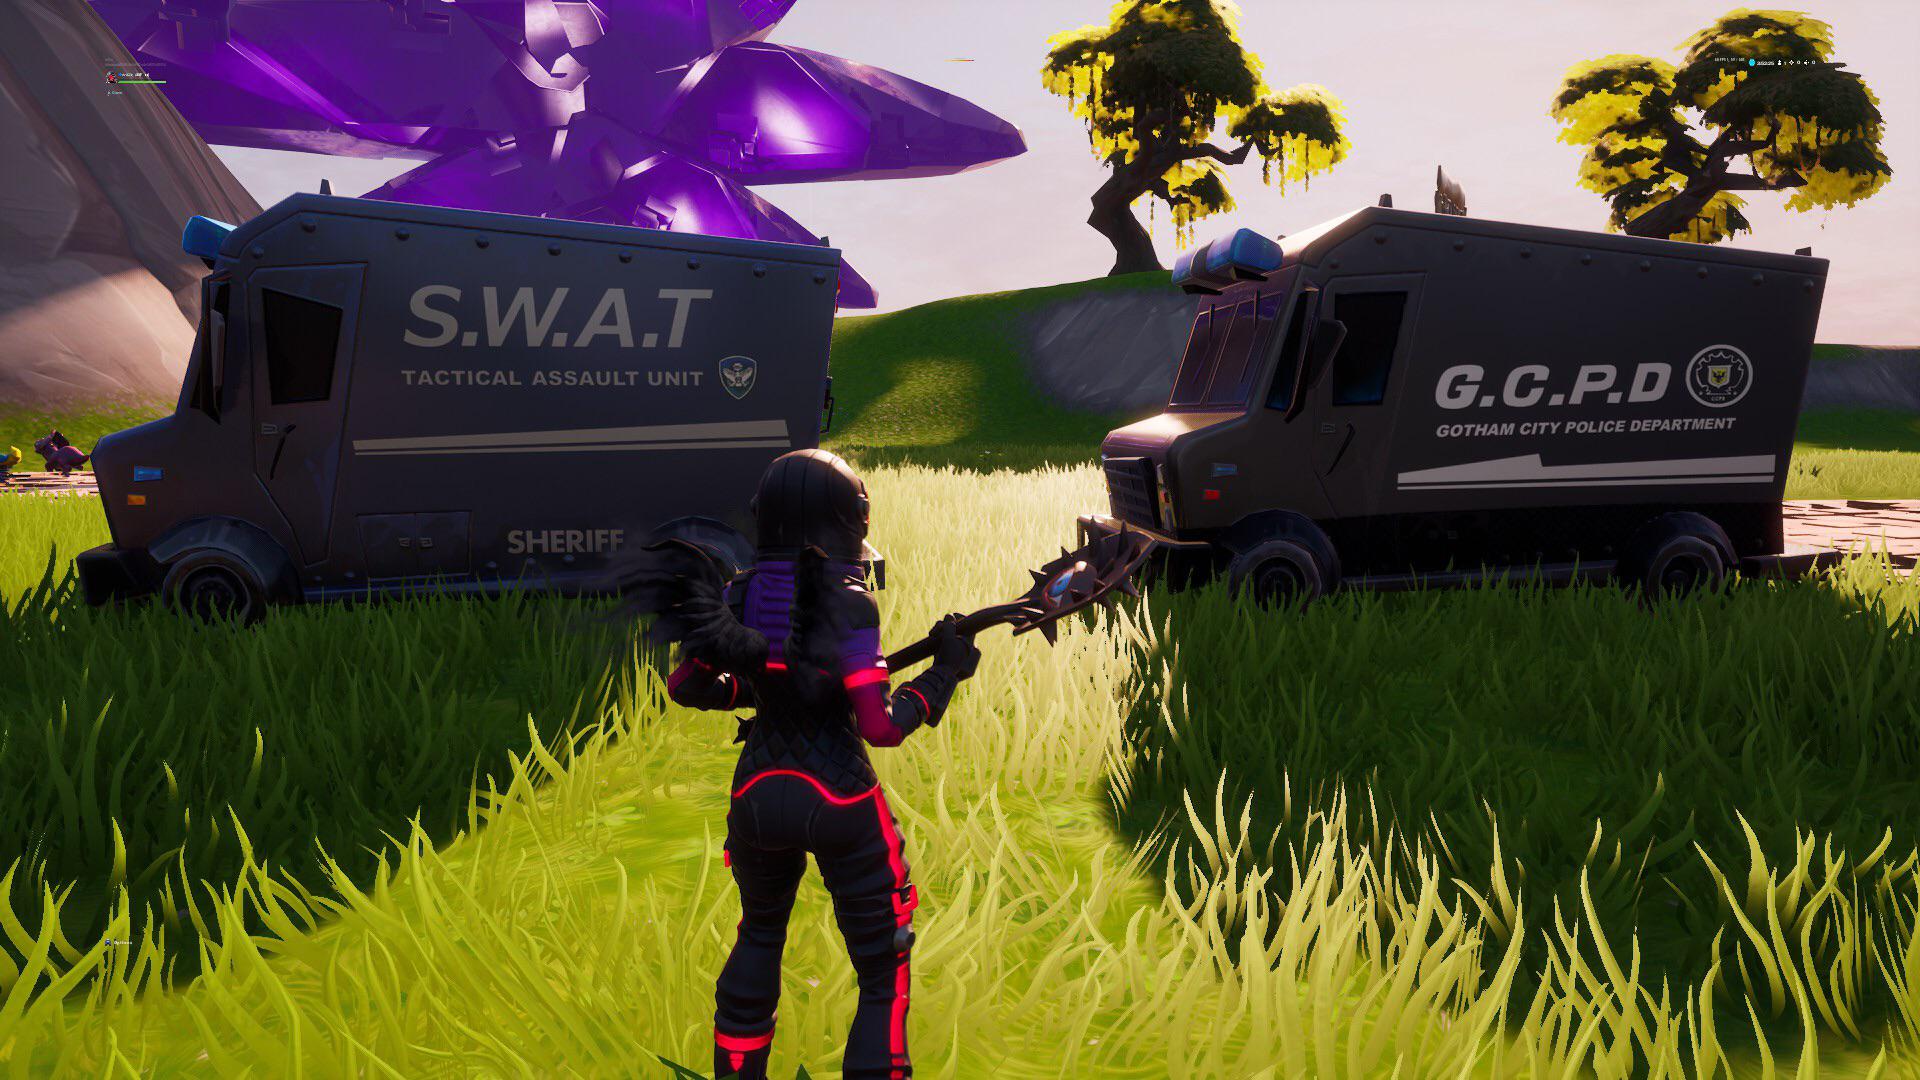 Who else grabbed the gotham swat truck when they had the chance: FortNiteBR